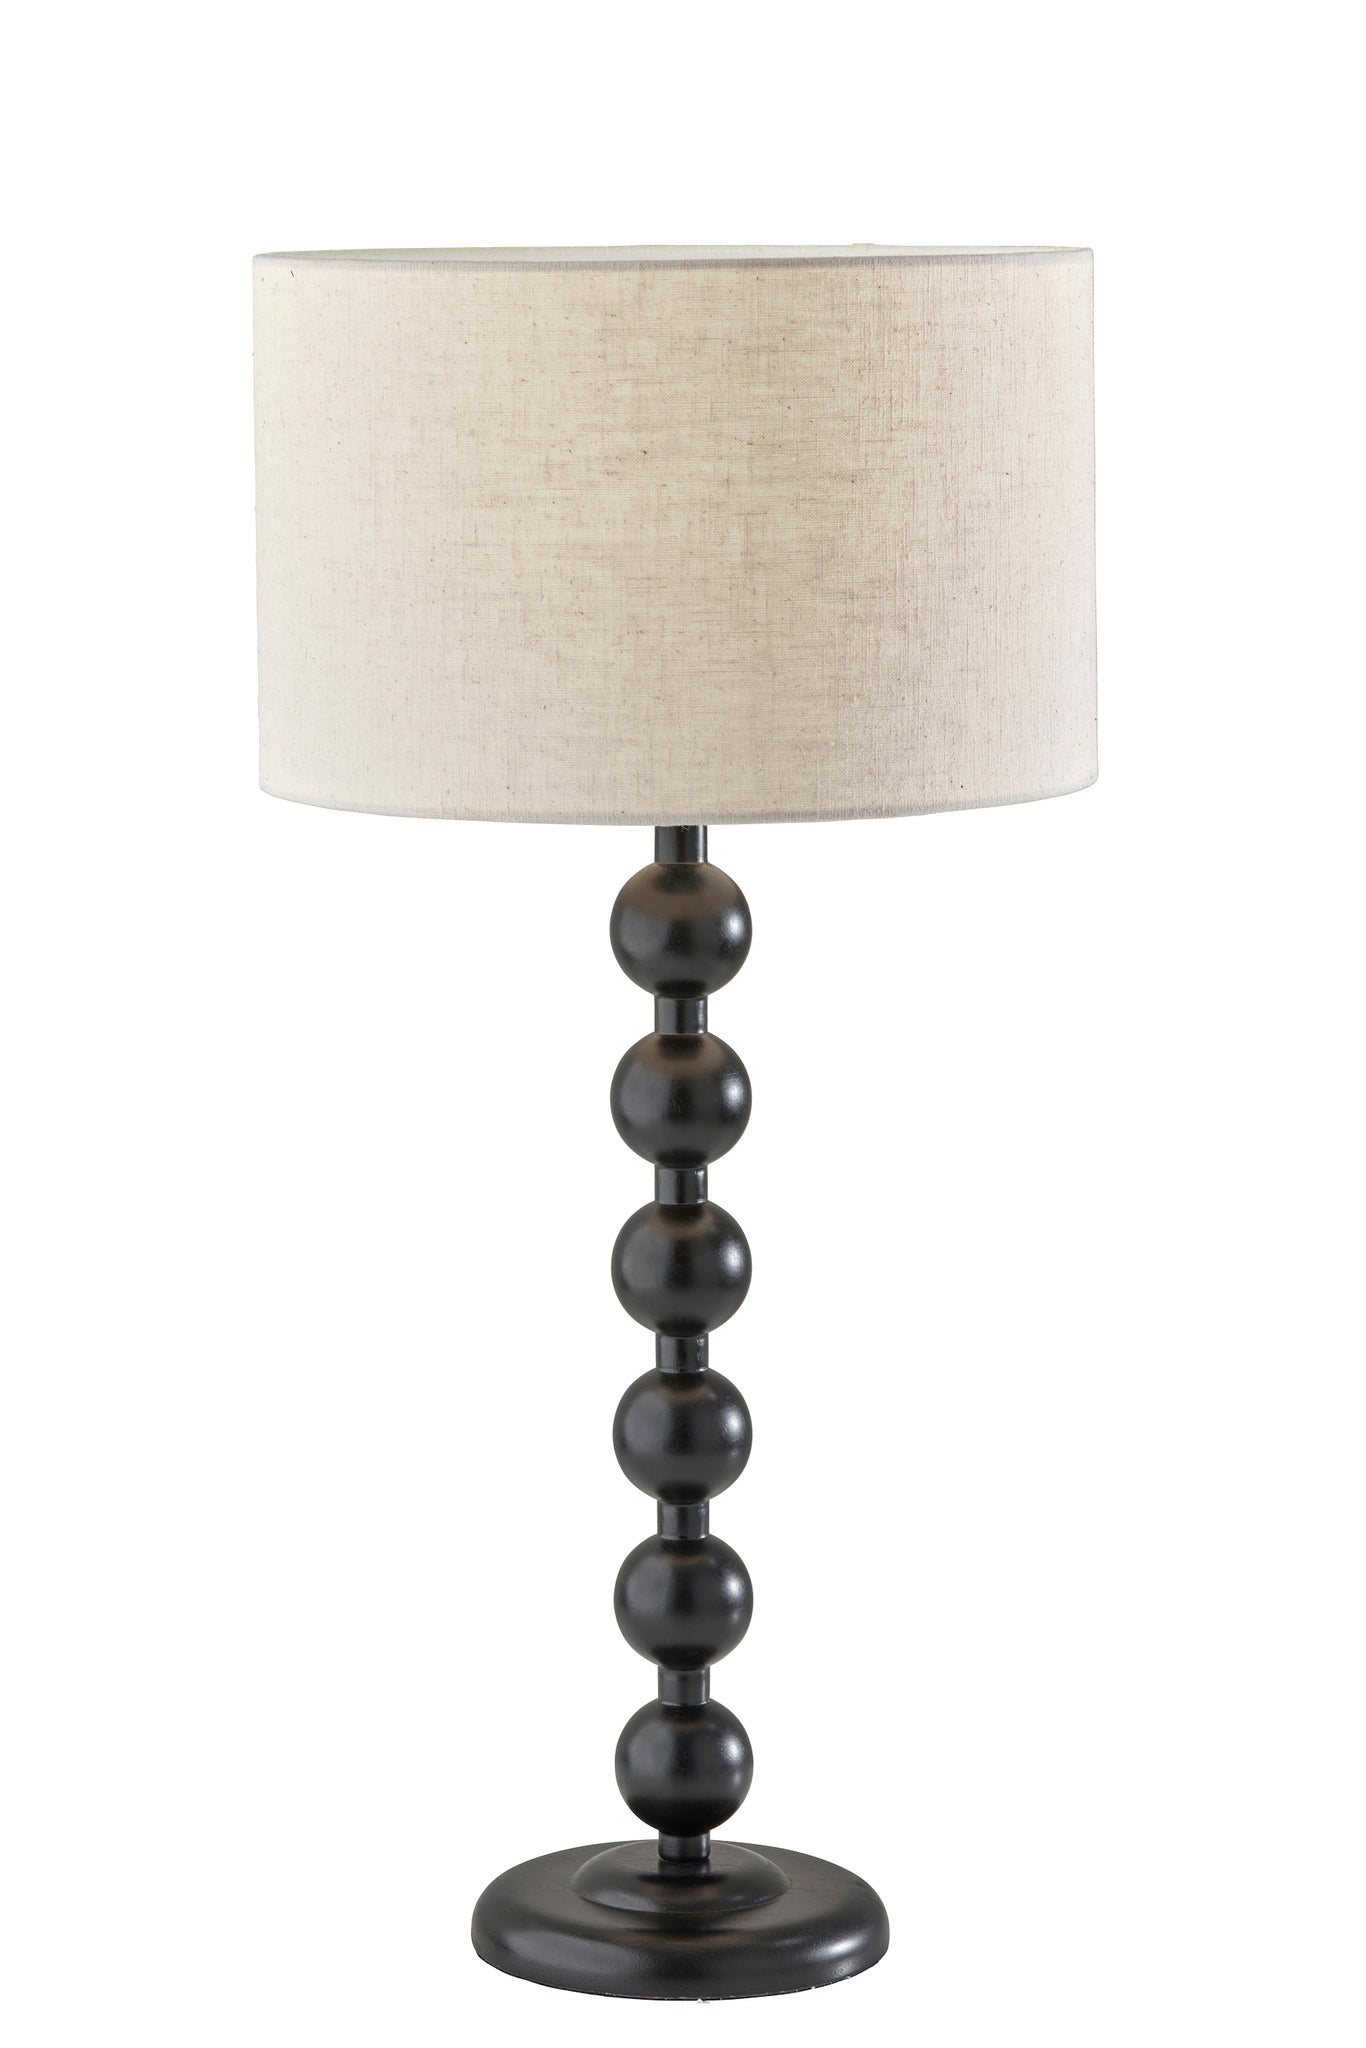 28" Black Solid Wood Candlestick Table Lamp With Off White Drum Shade